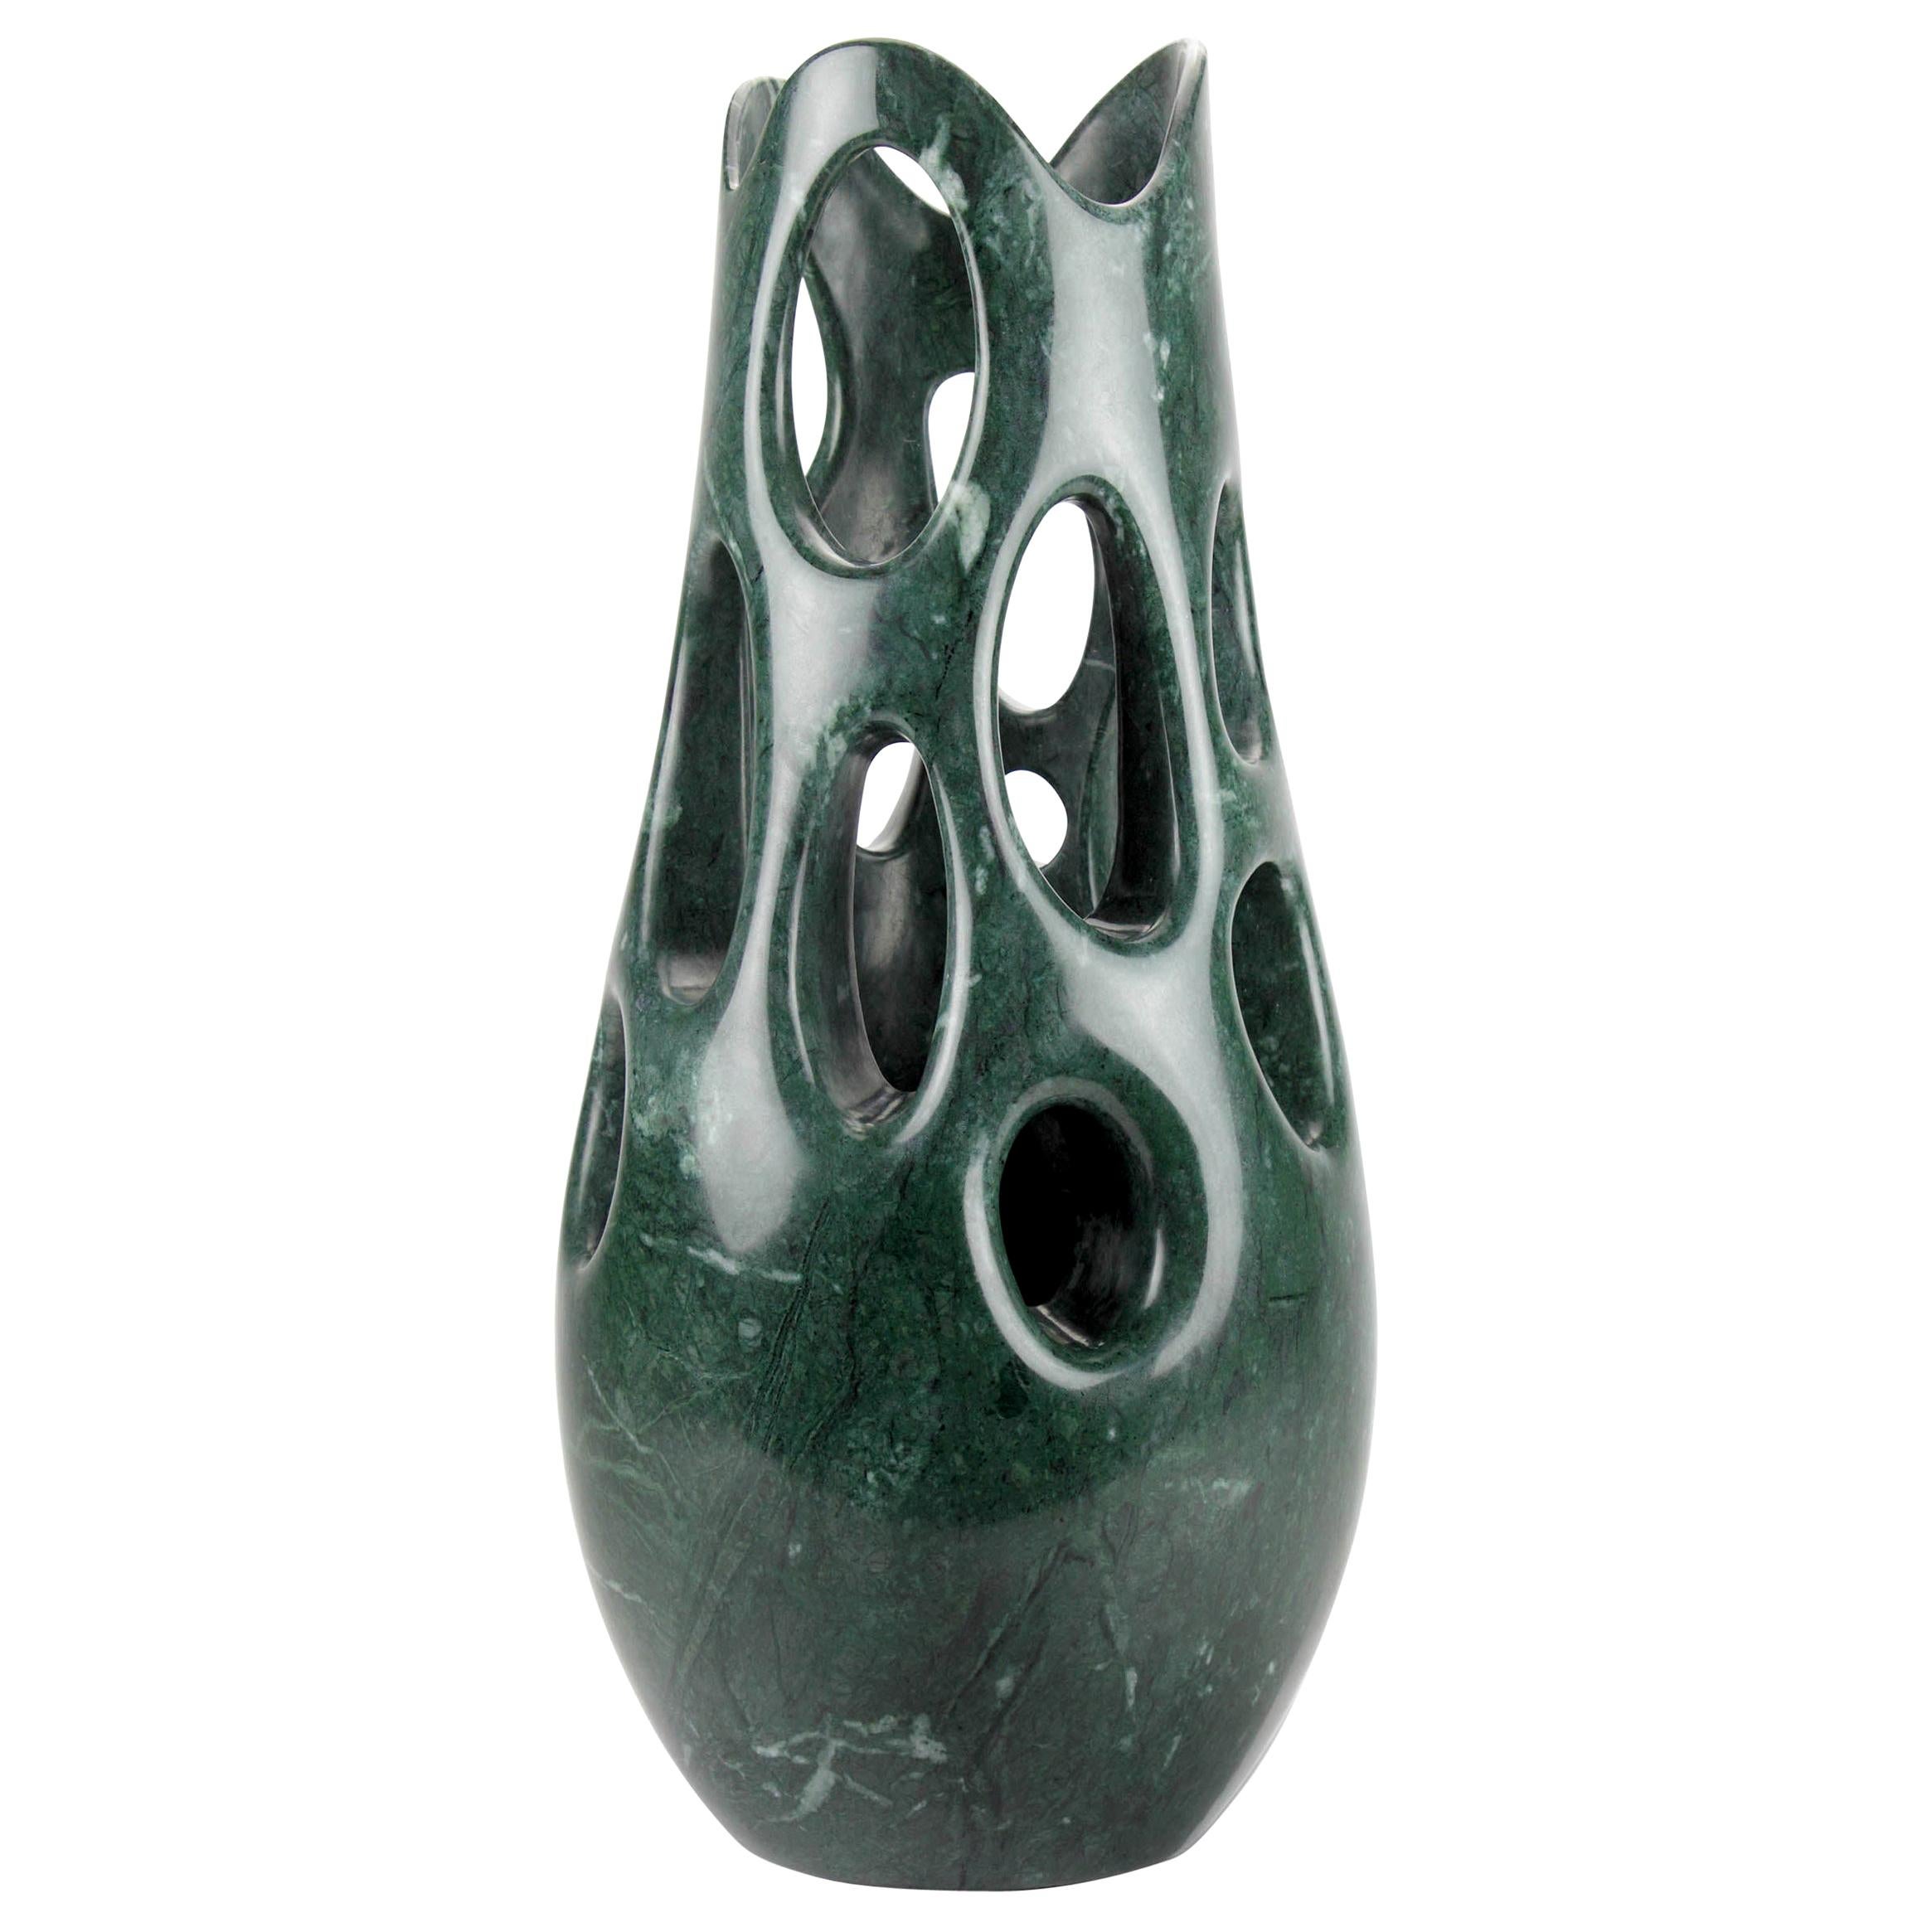 Vase Vessel Sculpture Organic Shape Solid Imperial Green Marble Handmade Italy For Sale